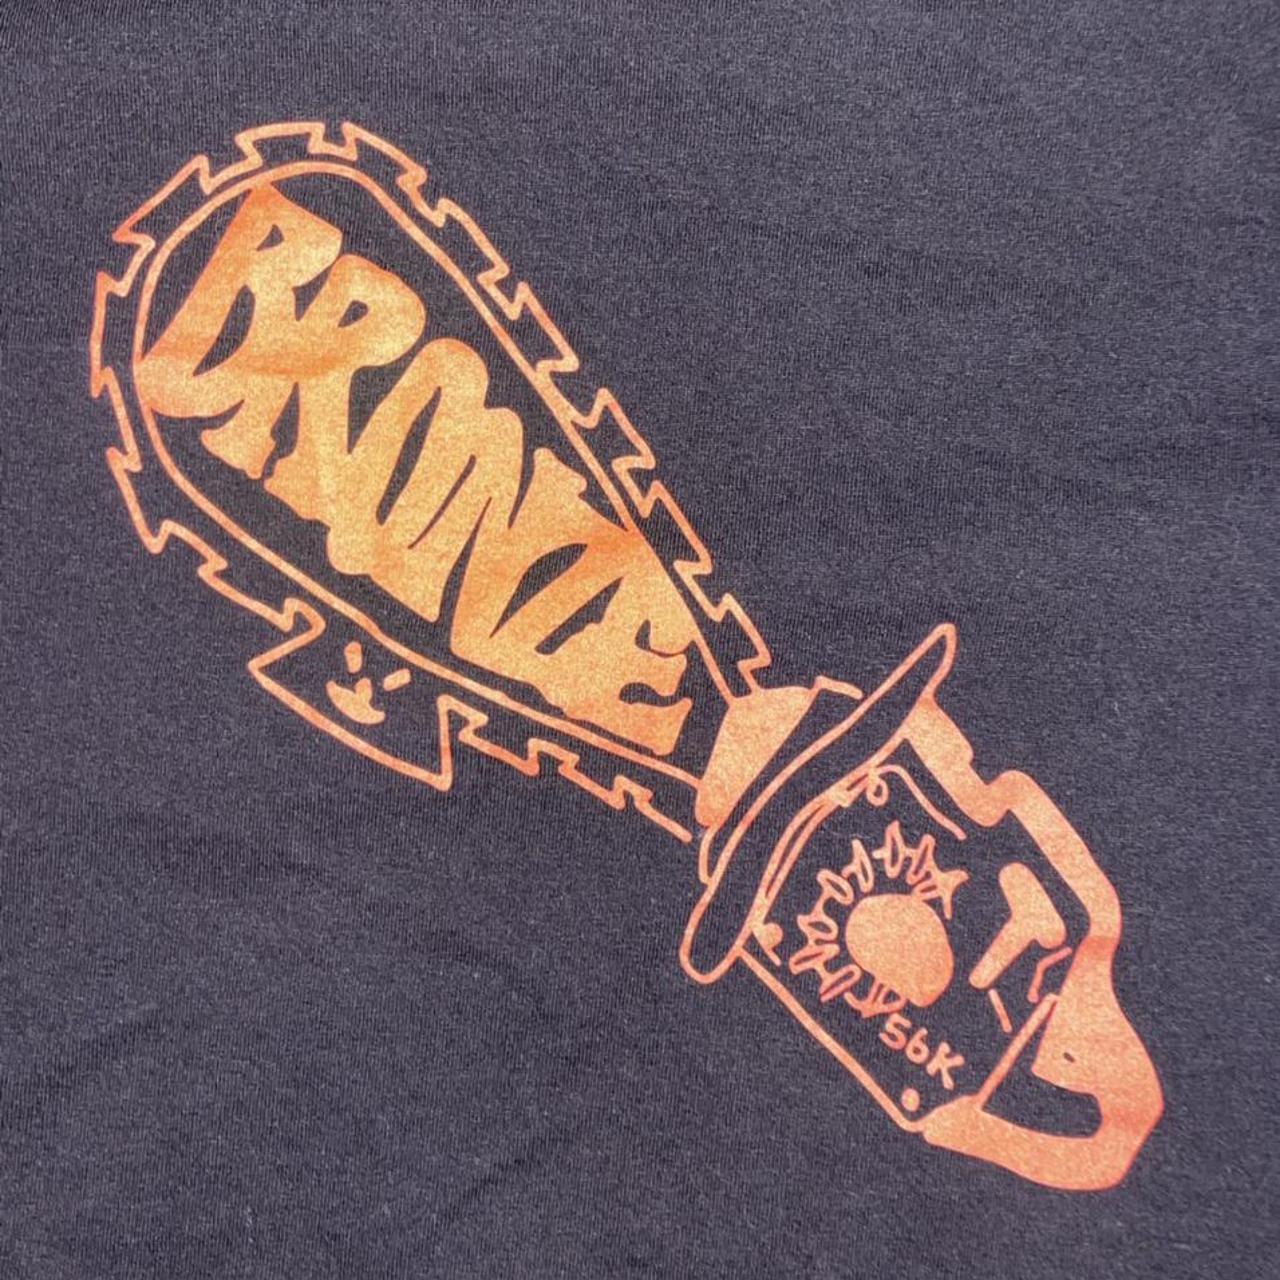 Product Image 3 - -Bronze56k chainsaw tee
-Size XL
-Condition is